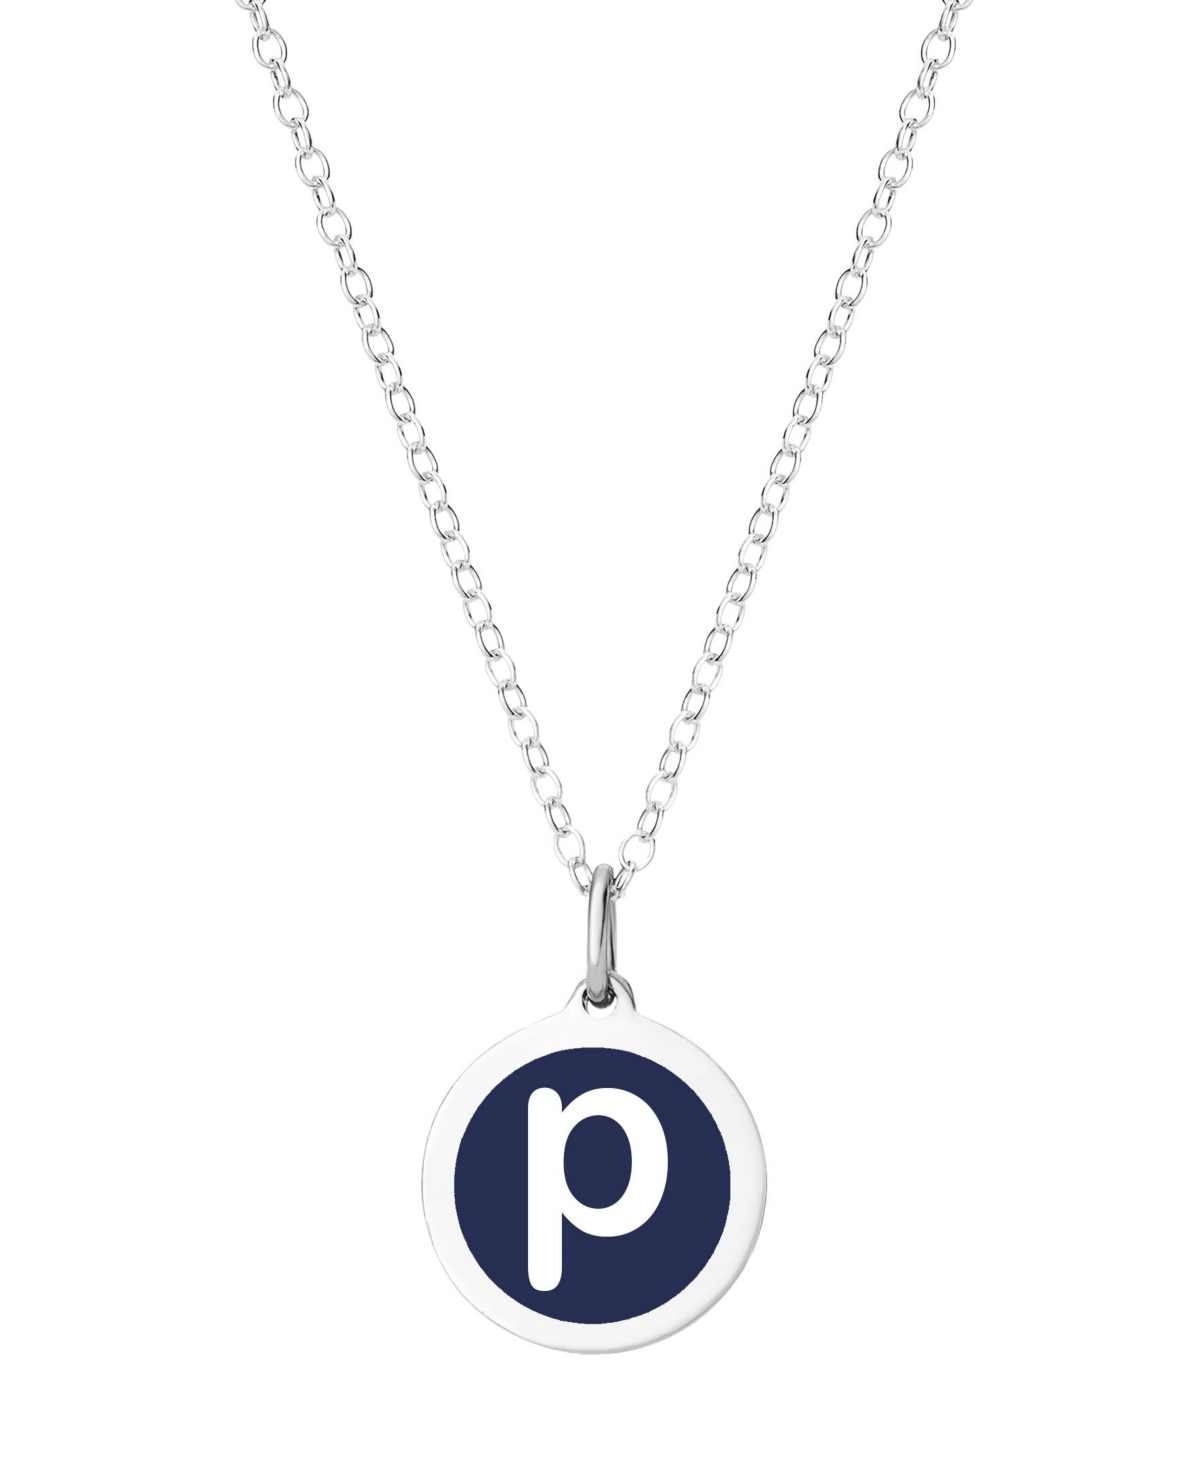 Mini Initial Pendant Necklace in Sterling Silver and Navy Enamel, 16" + 2" Extender - Navy-Y